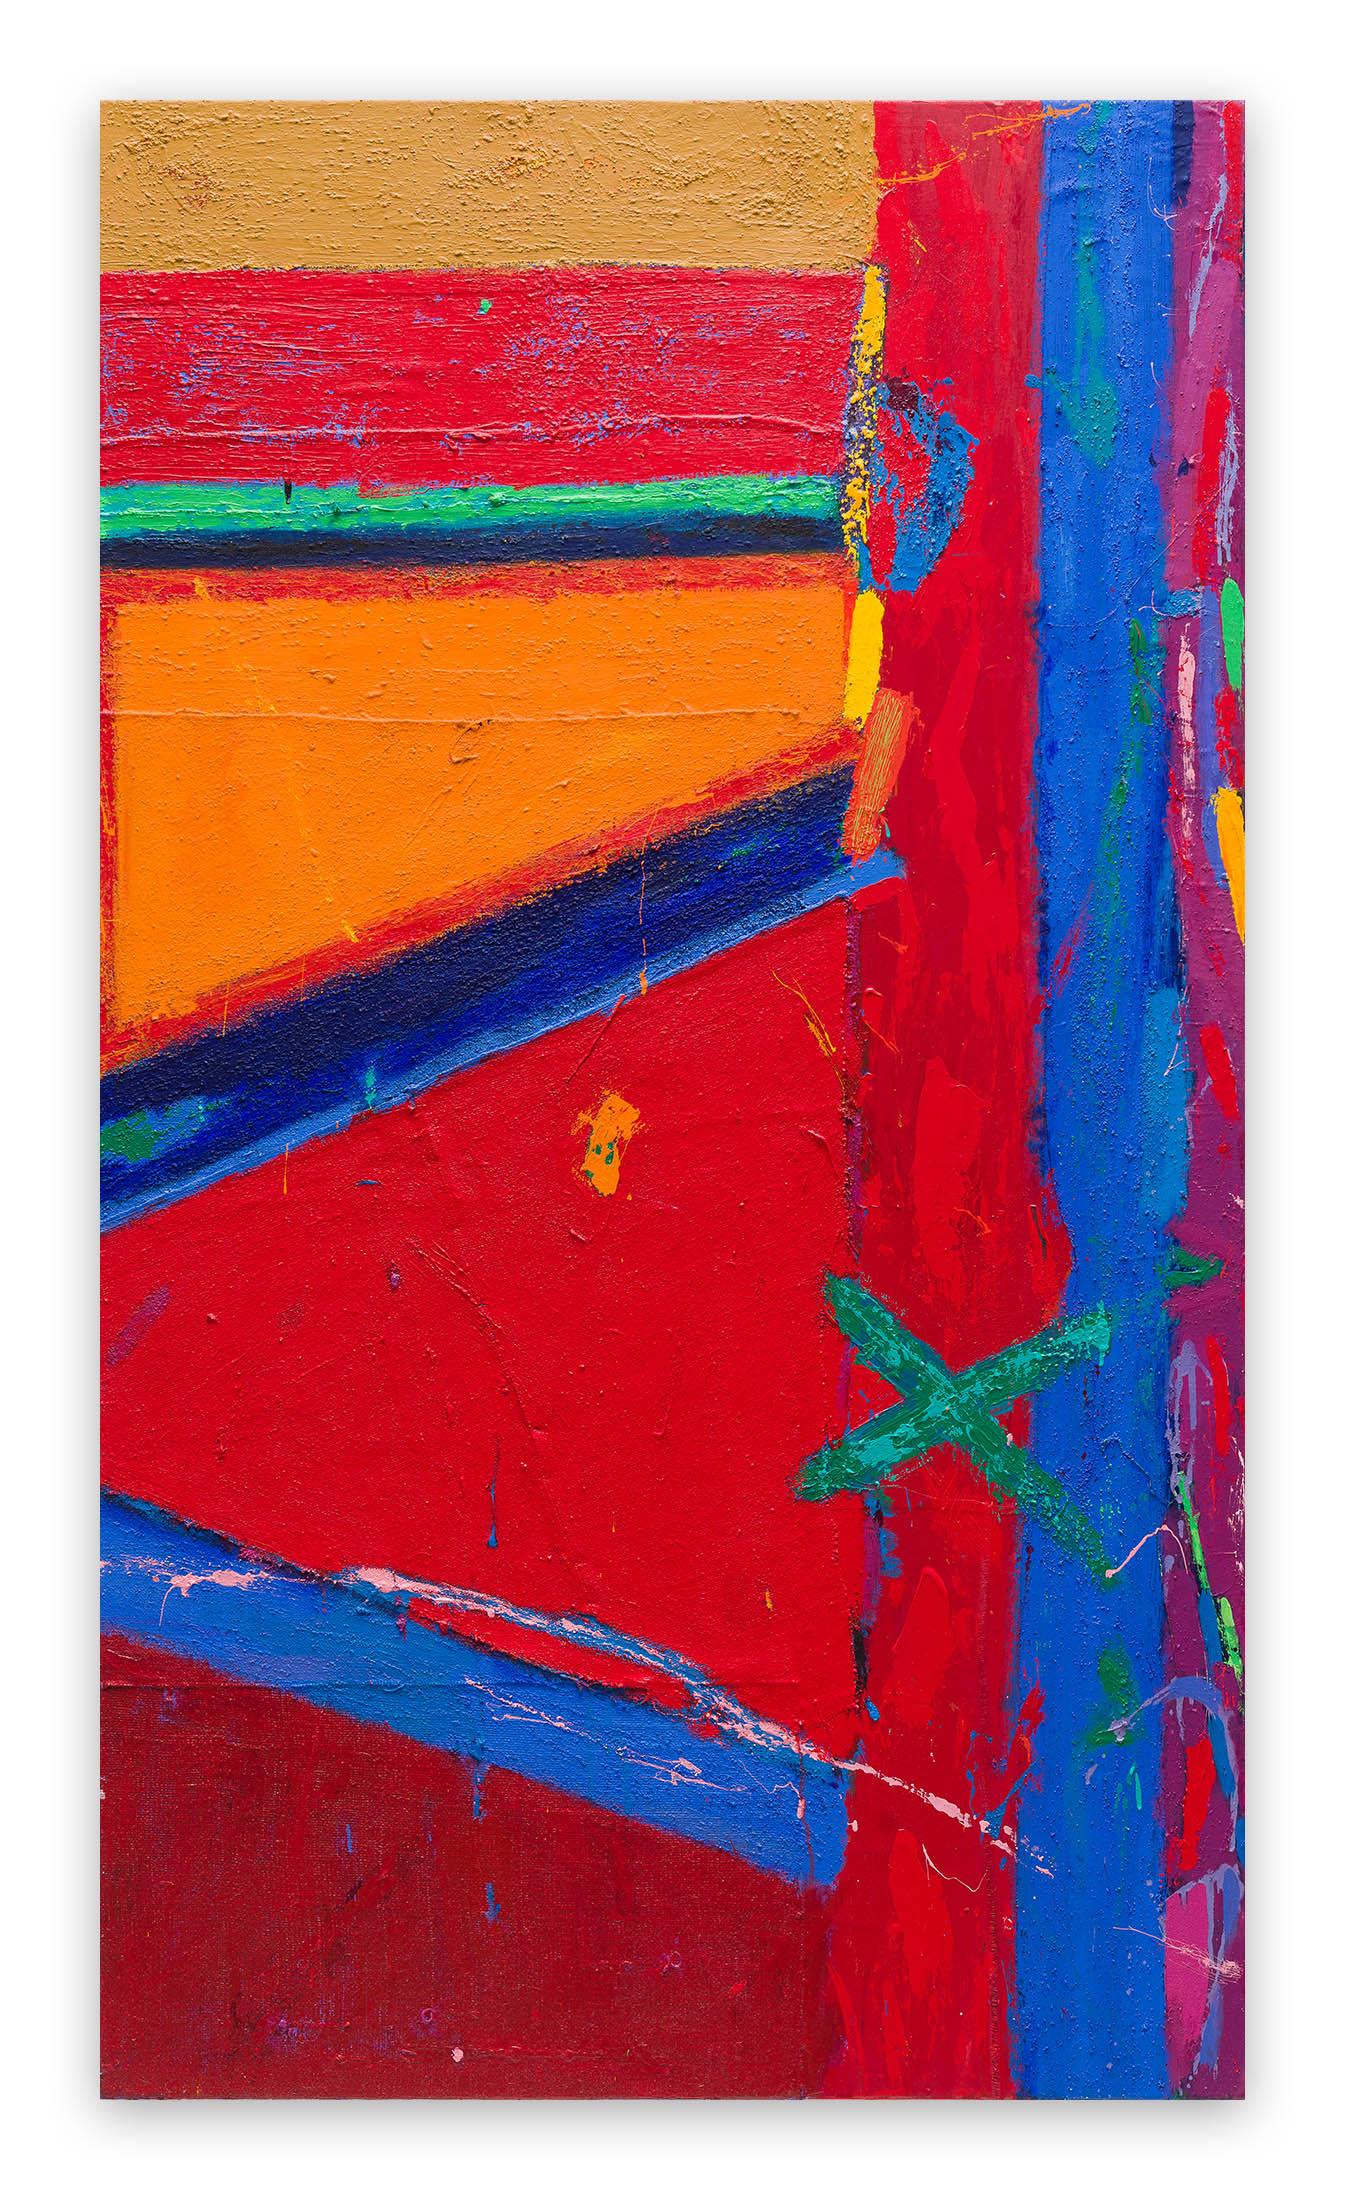 Clear Spot (Abstract Painting)

Acrylic and pumice on sacking, sailcloth and canvas -  Unframed.

Anthony Frost, son of Sir Terry Frost RA, is an English abstract artist whose vibrant, colorful paintings and prints exhibit the raw energy and freedom